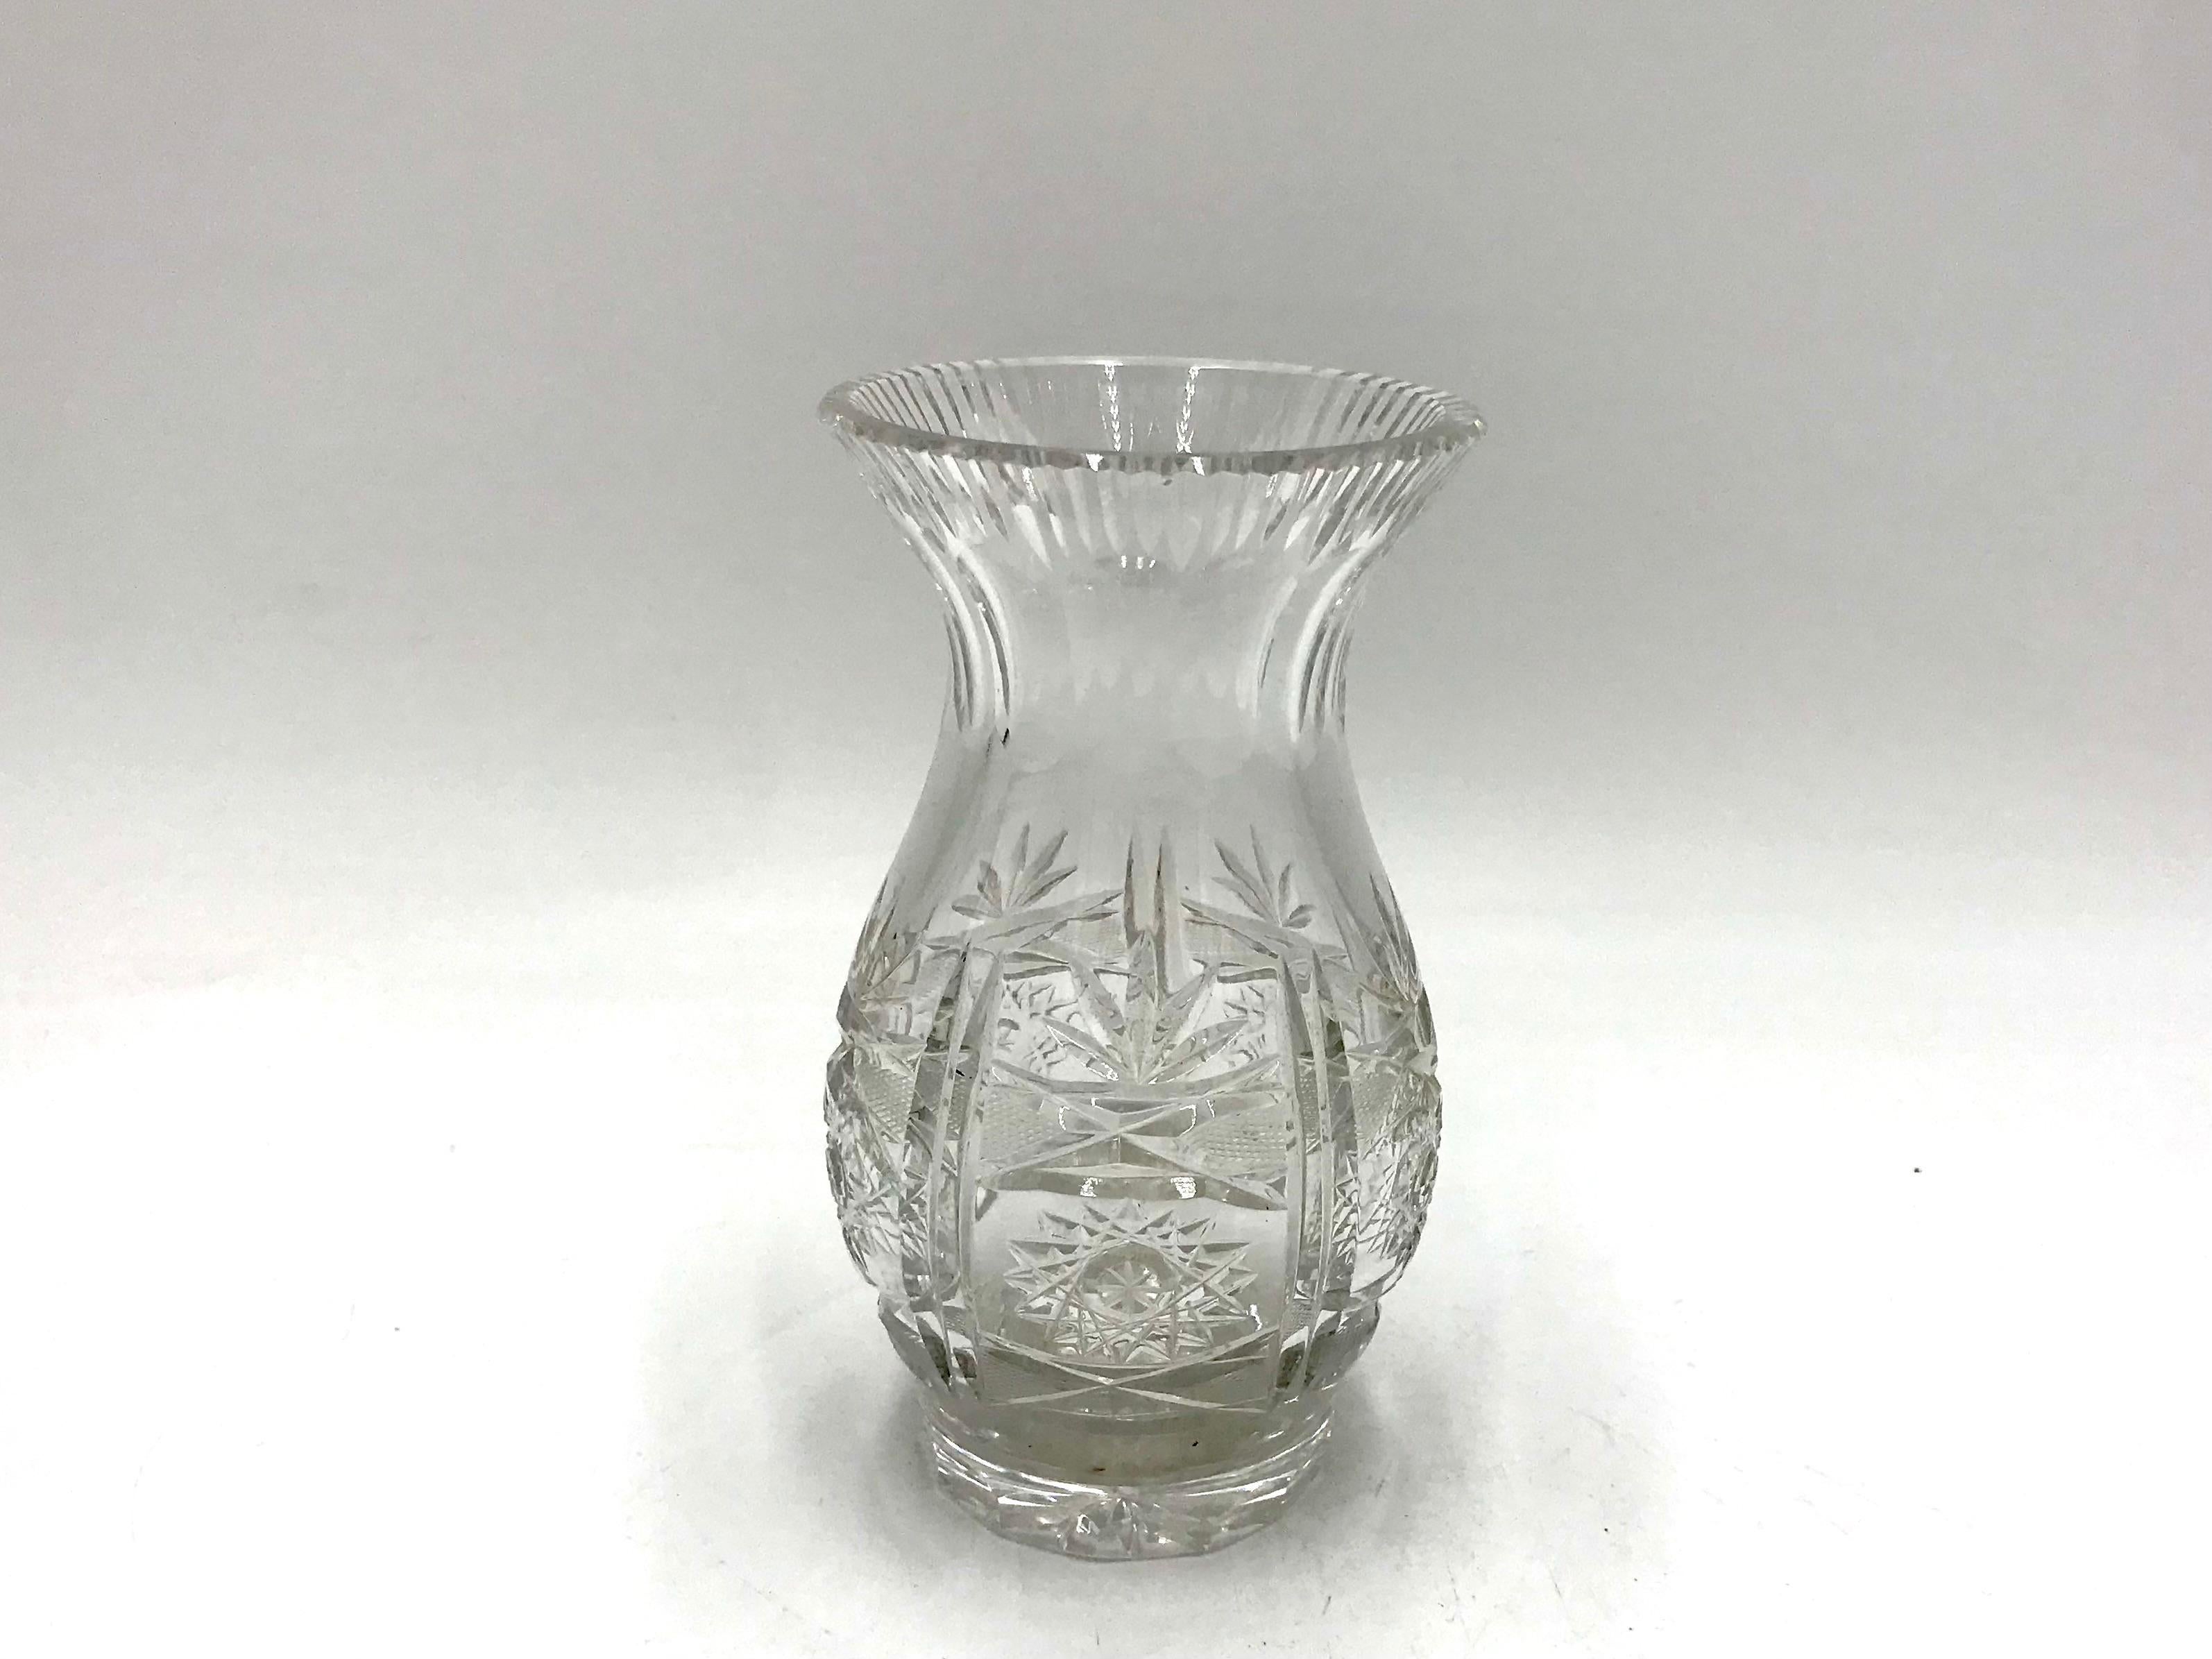 Vase made of crystal. 
The vase was produced in Poland in the 1960s and 1970s.
Vase in very good condition
Measures: Height 15cm / diameter 8cm.